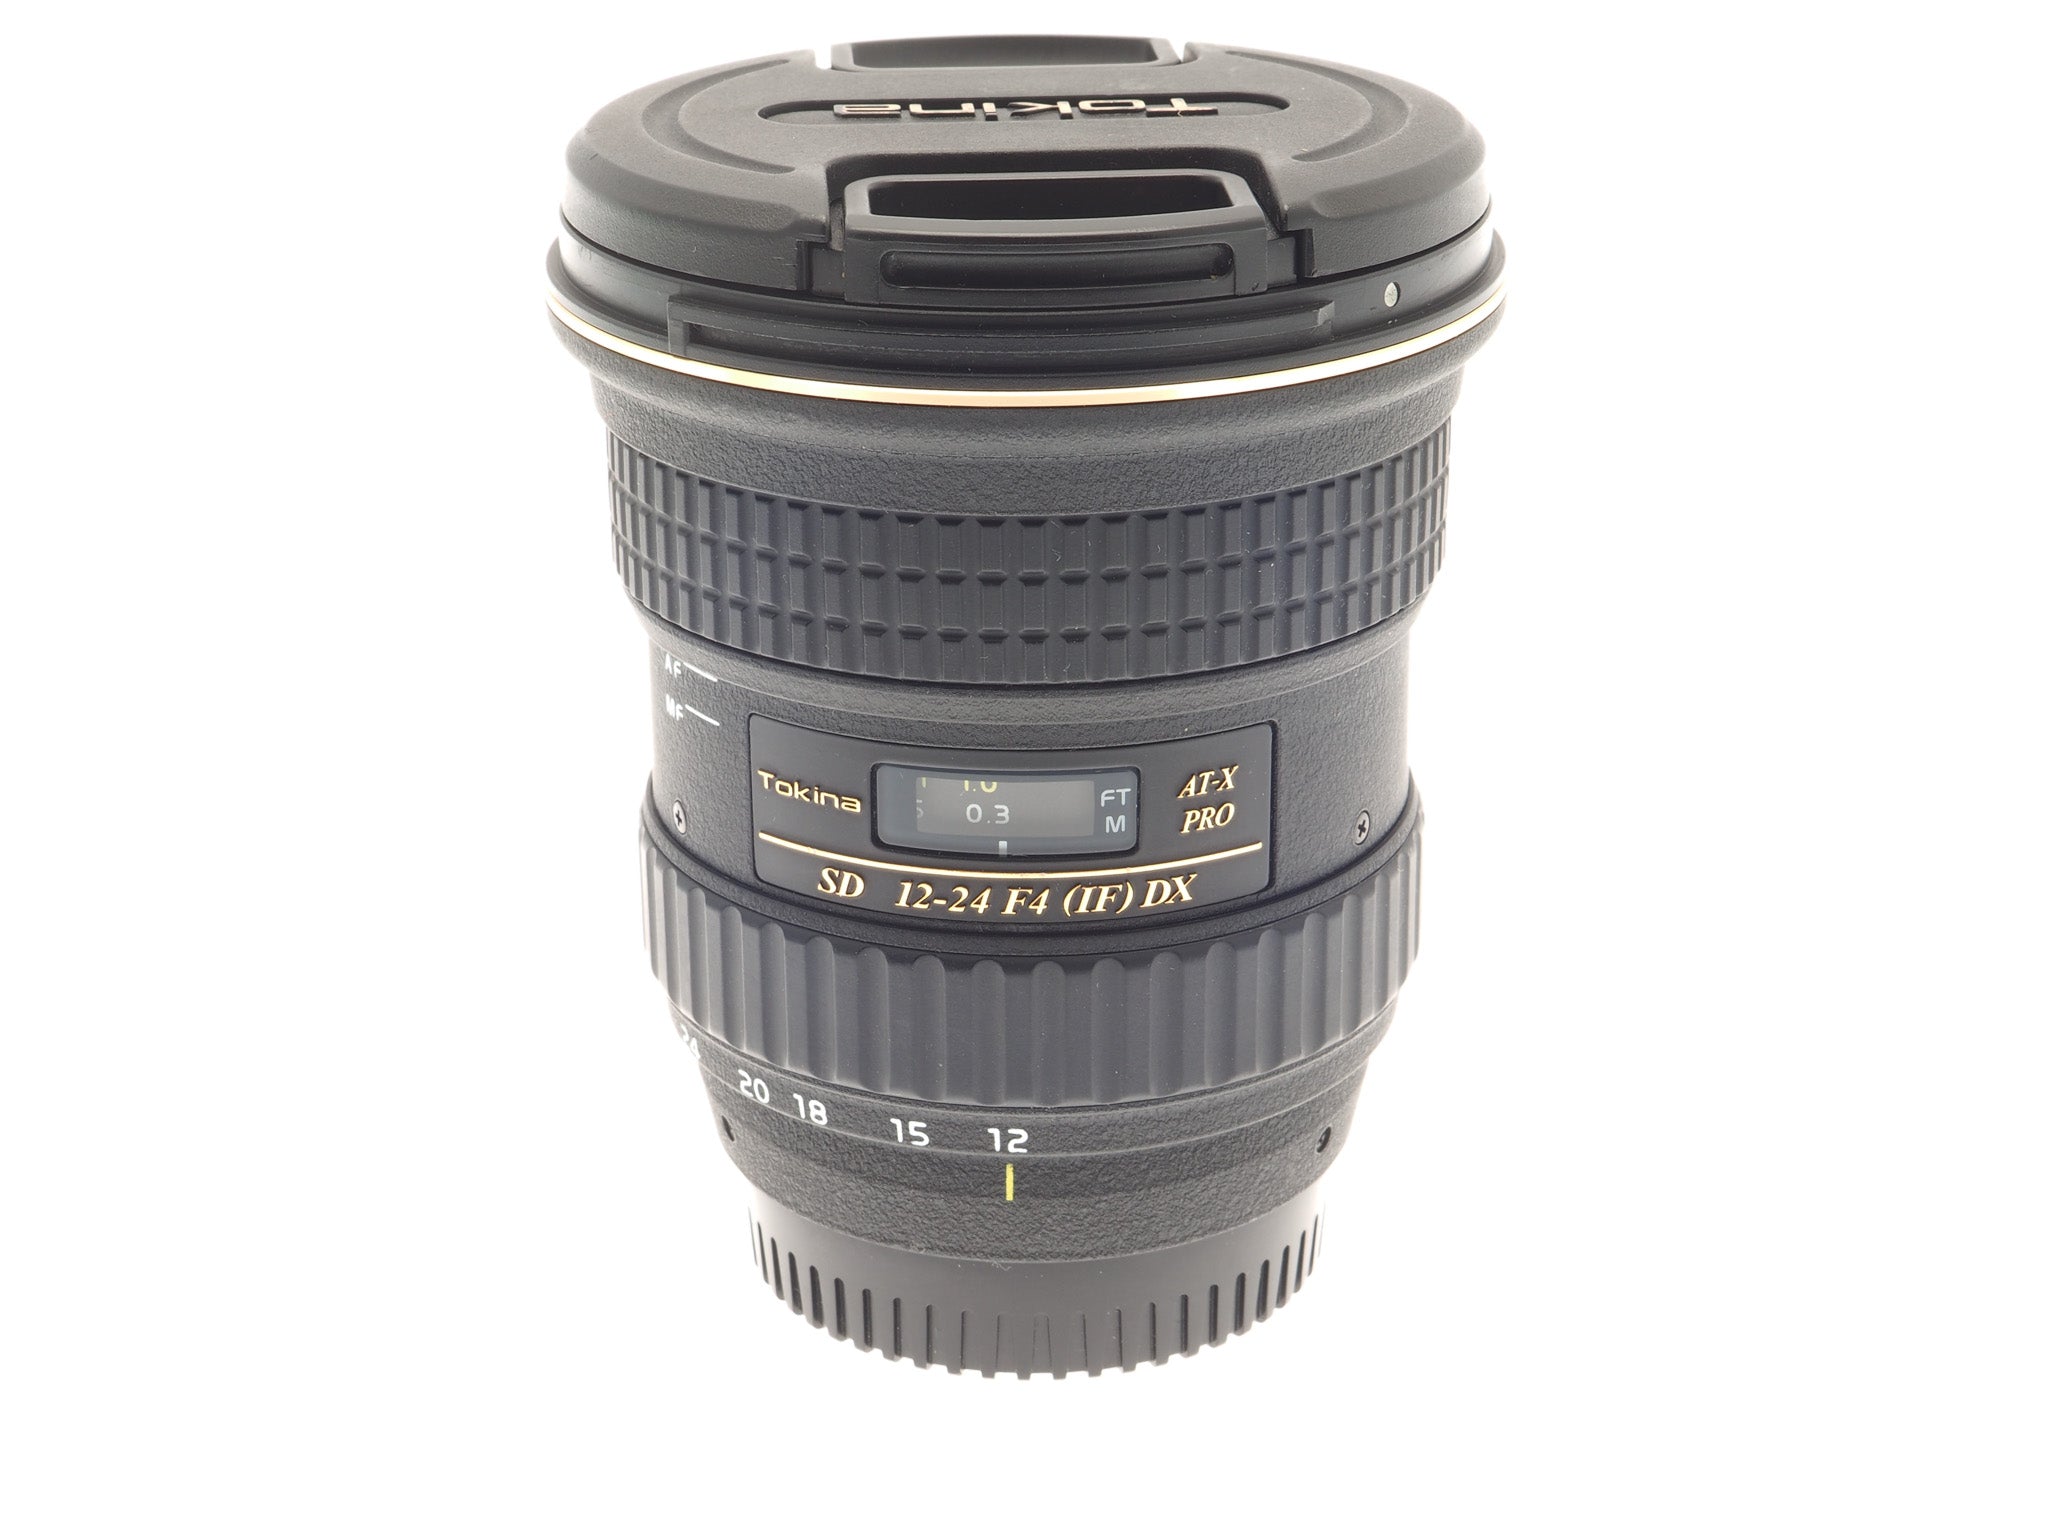 Tokina AT-X PRO SD 12-24mm F4 IF DX II-